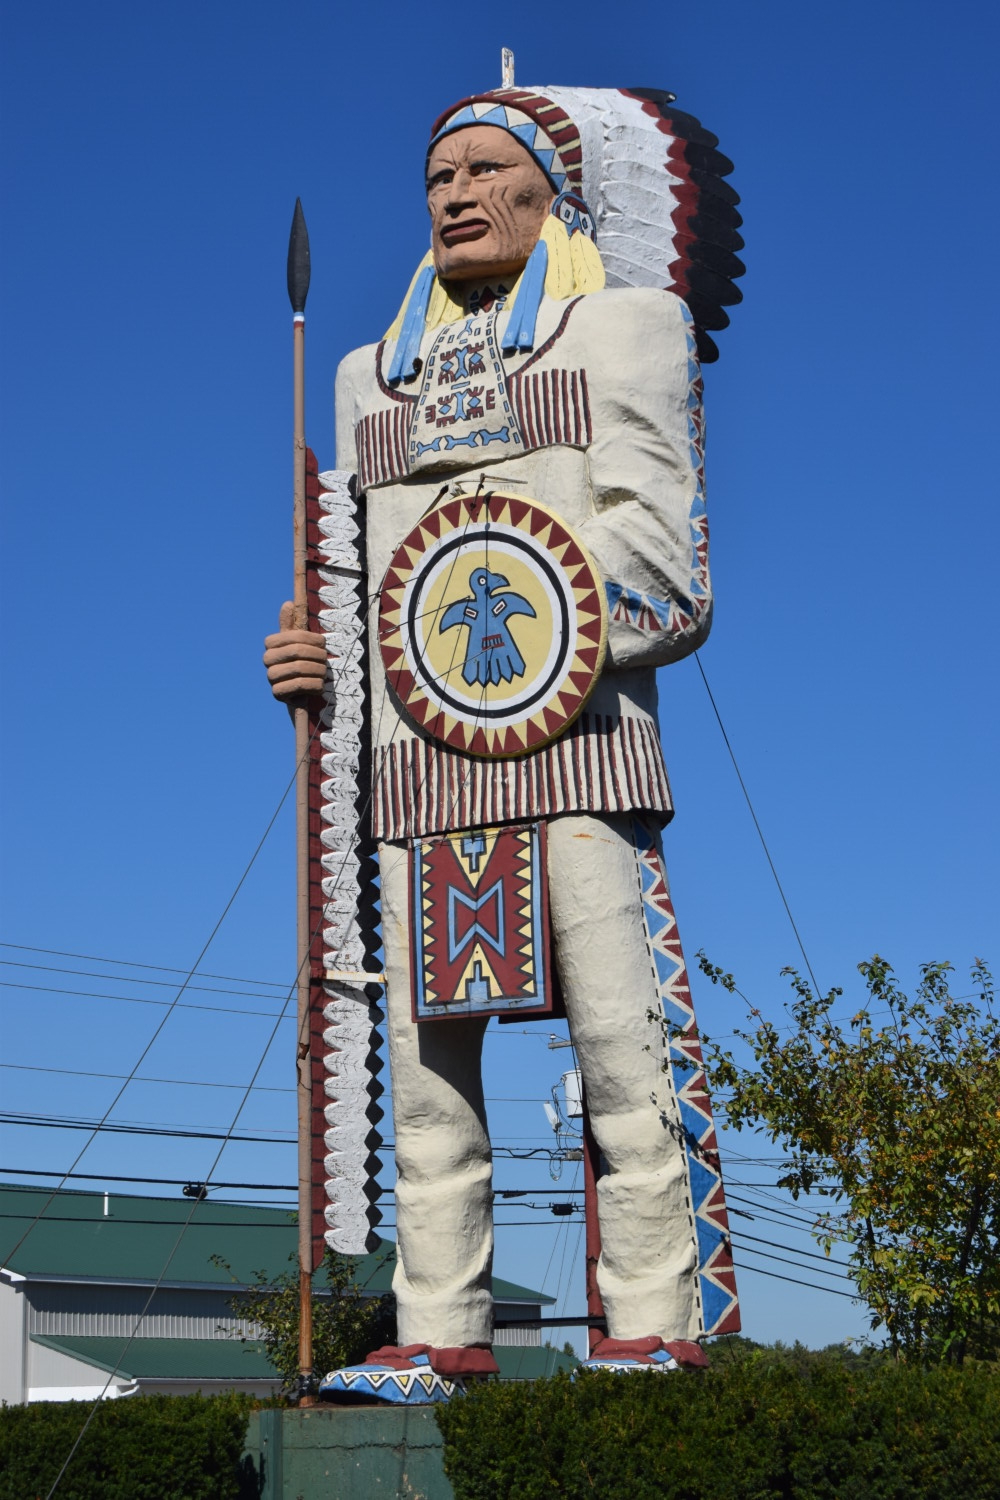 With new owners, 'Big Indian' statue to remain in Freeport — for now